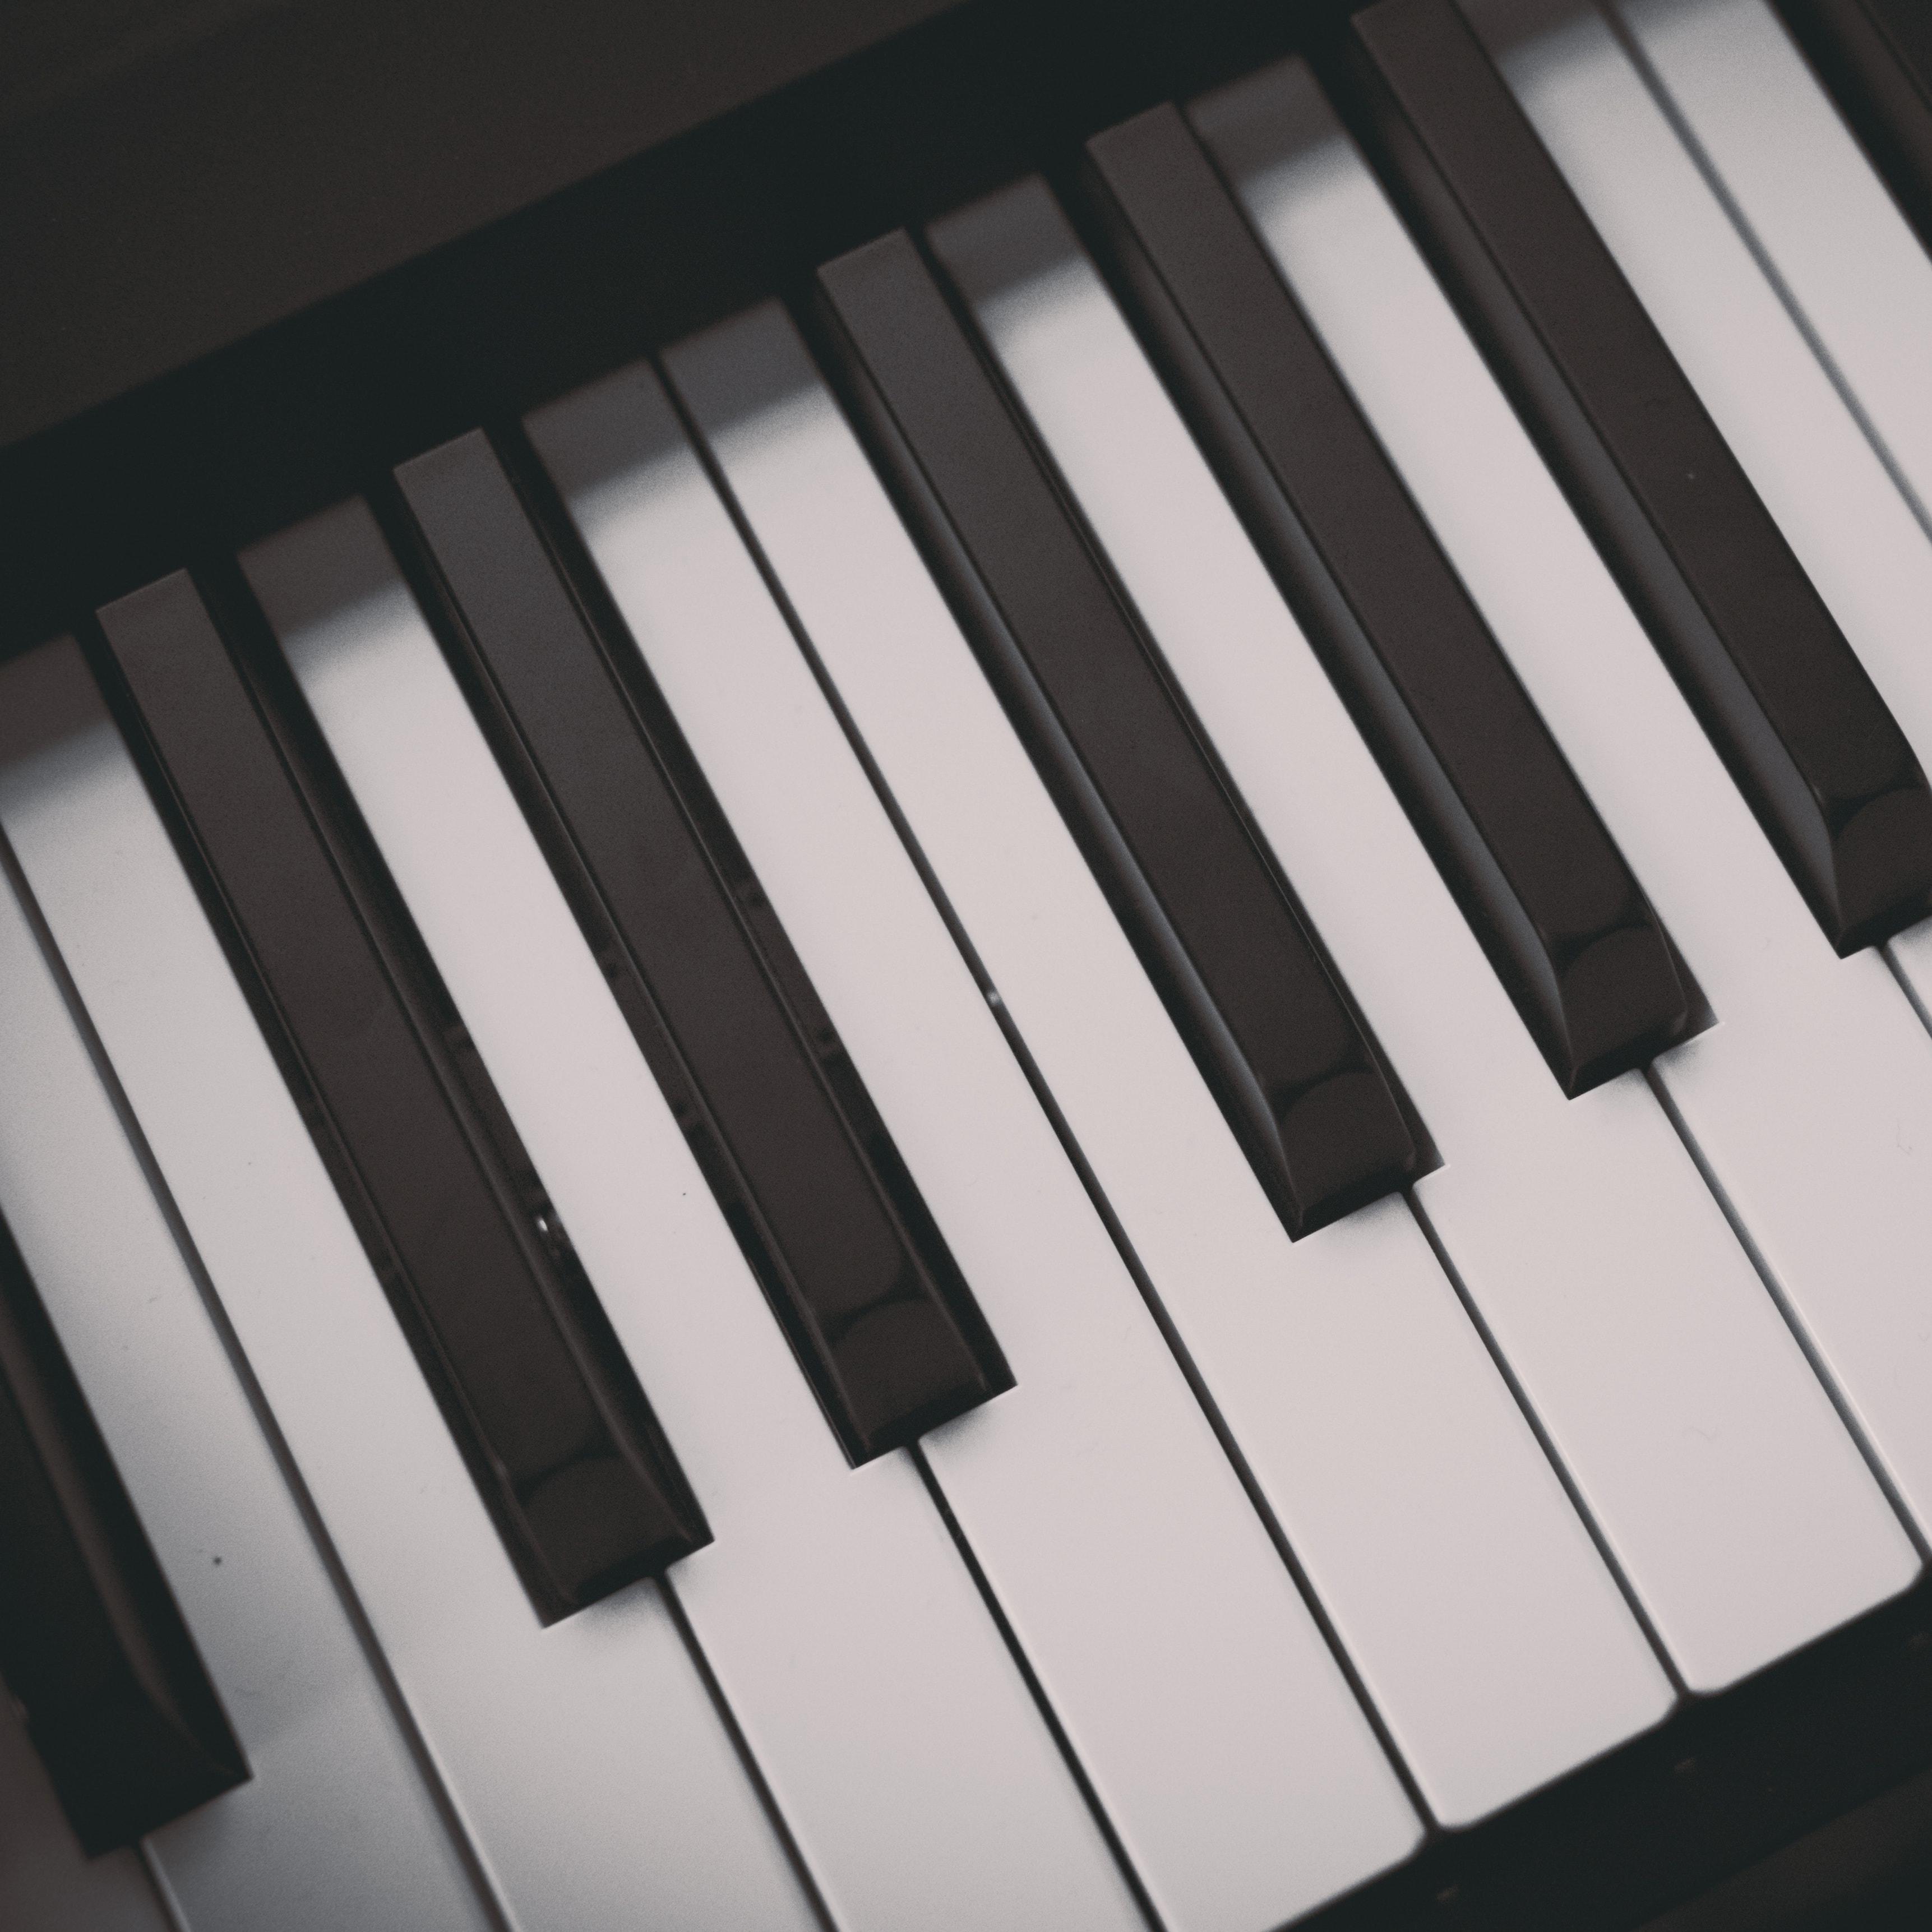 Piano Study Mix - 30 Tracks for Deep Focus and Concentration